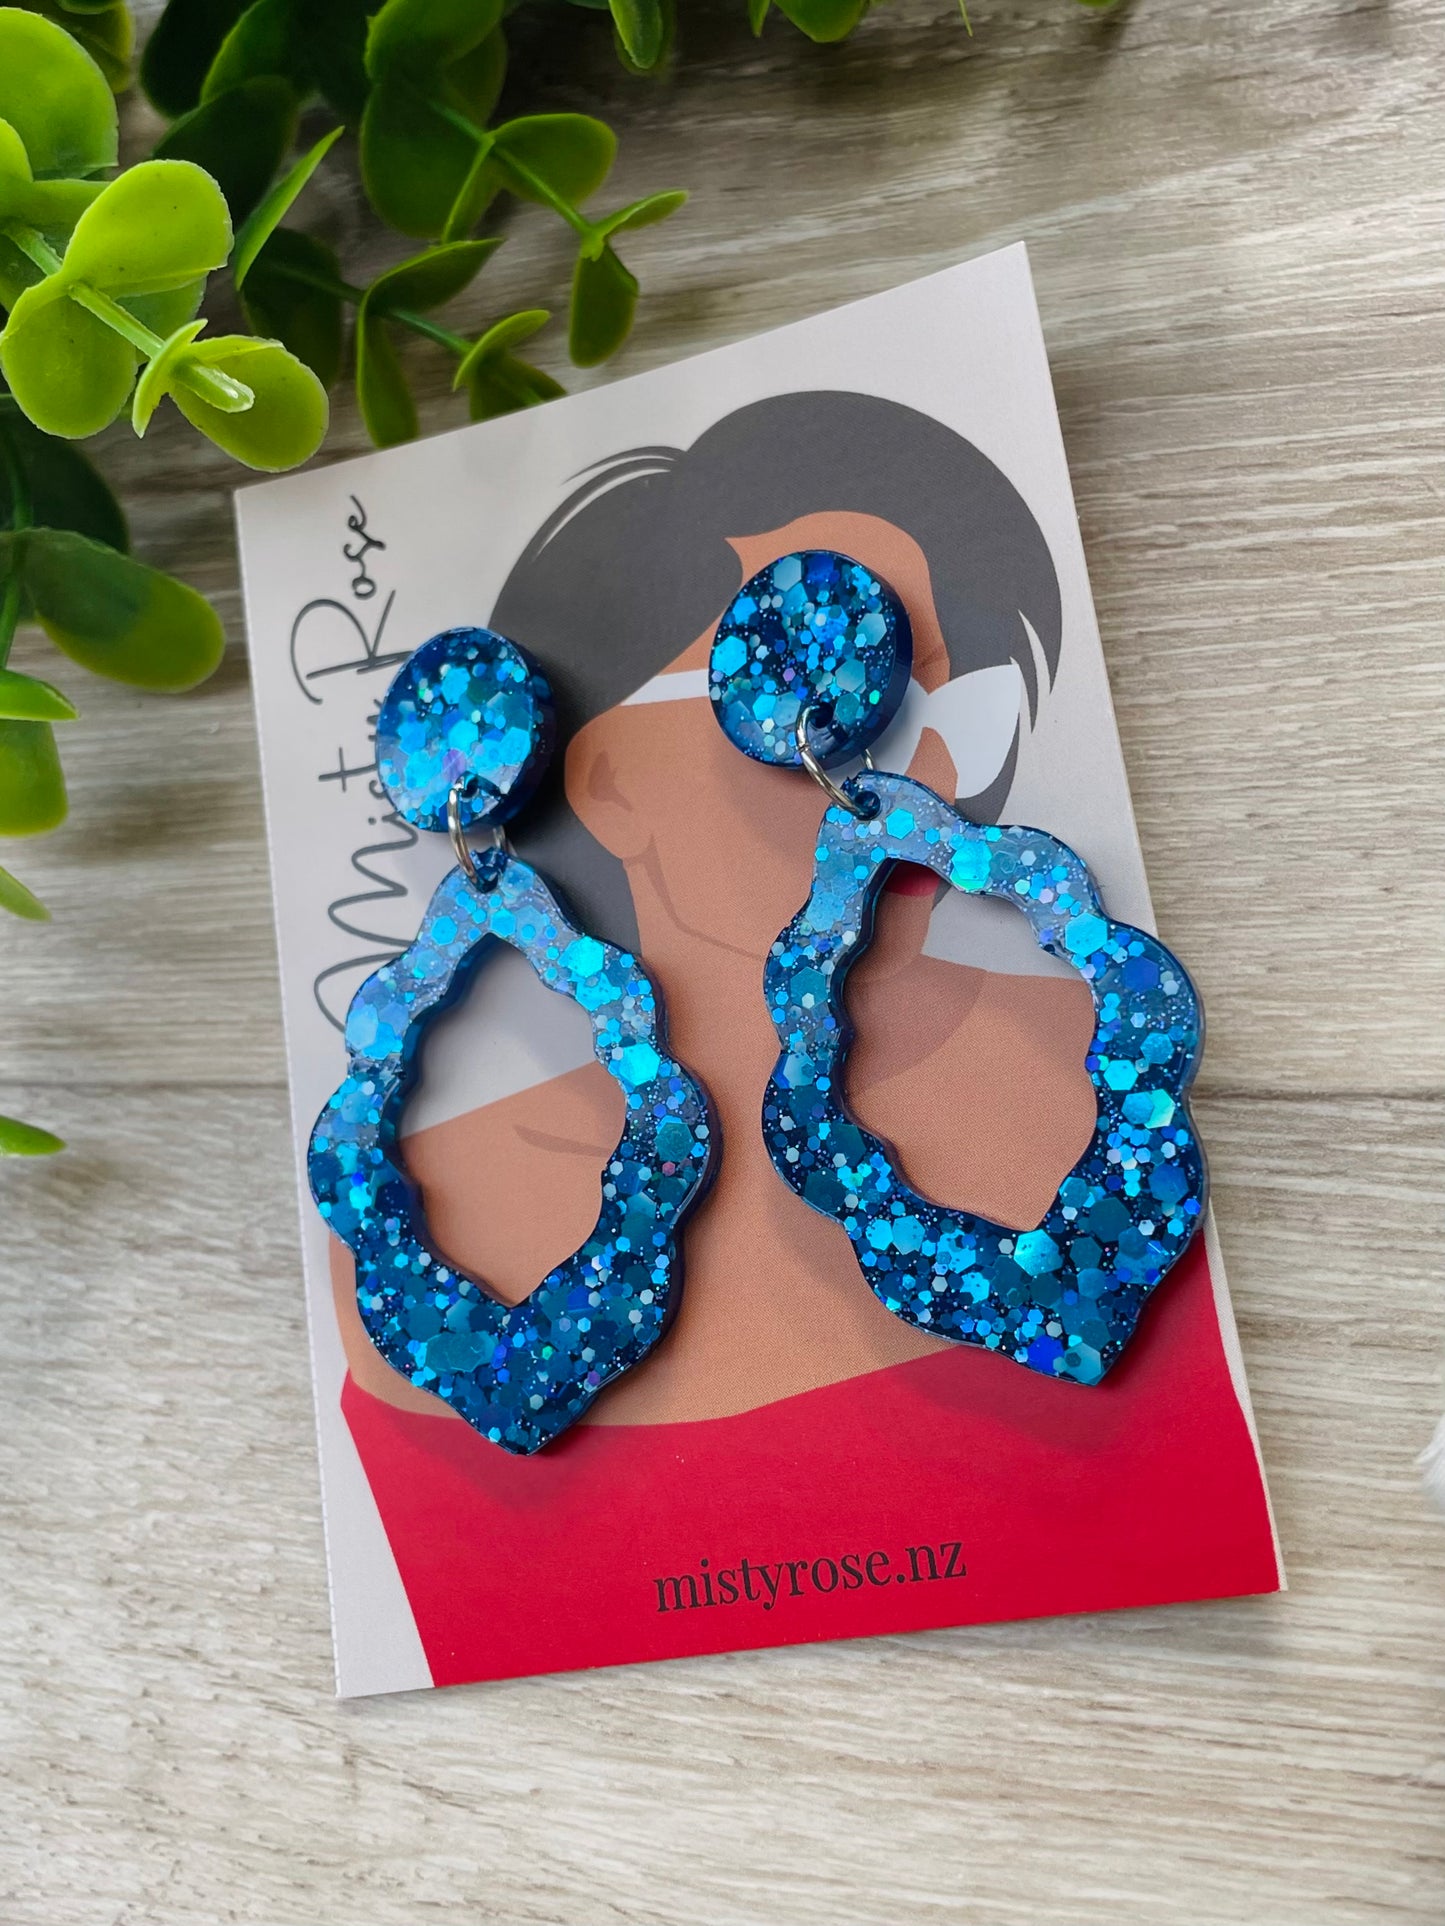 Dark blue glittery frilly teardrop earrings 💫  These fun, lightweight earrings are sure to add some sparkle to any look!  Approx 5cm x 3.5cm with stud topper